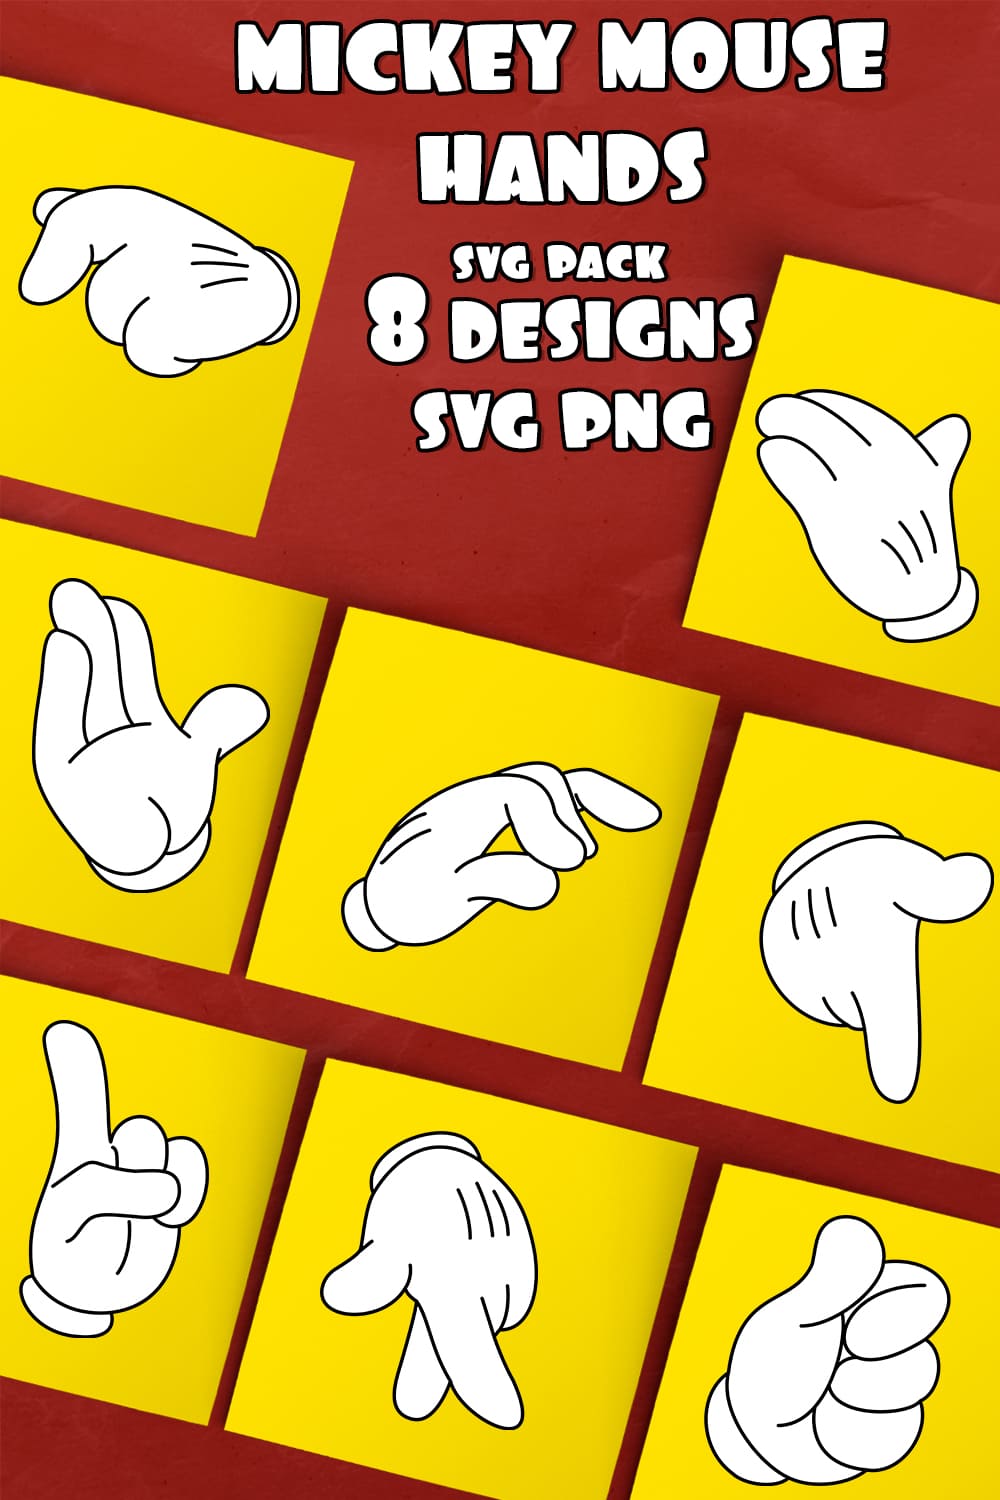 Mickey Mouse Hands Svg - Pinterest.